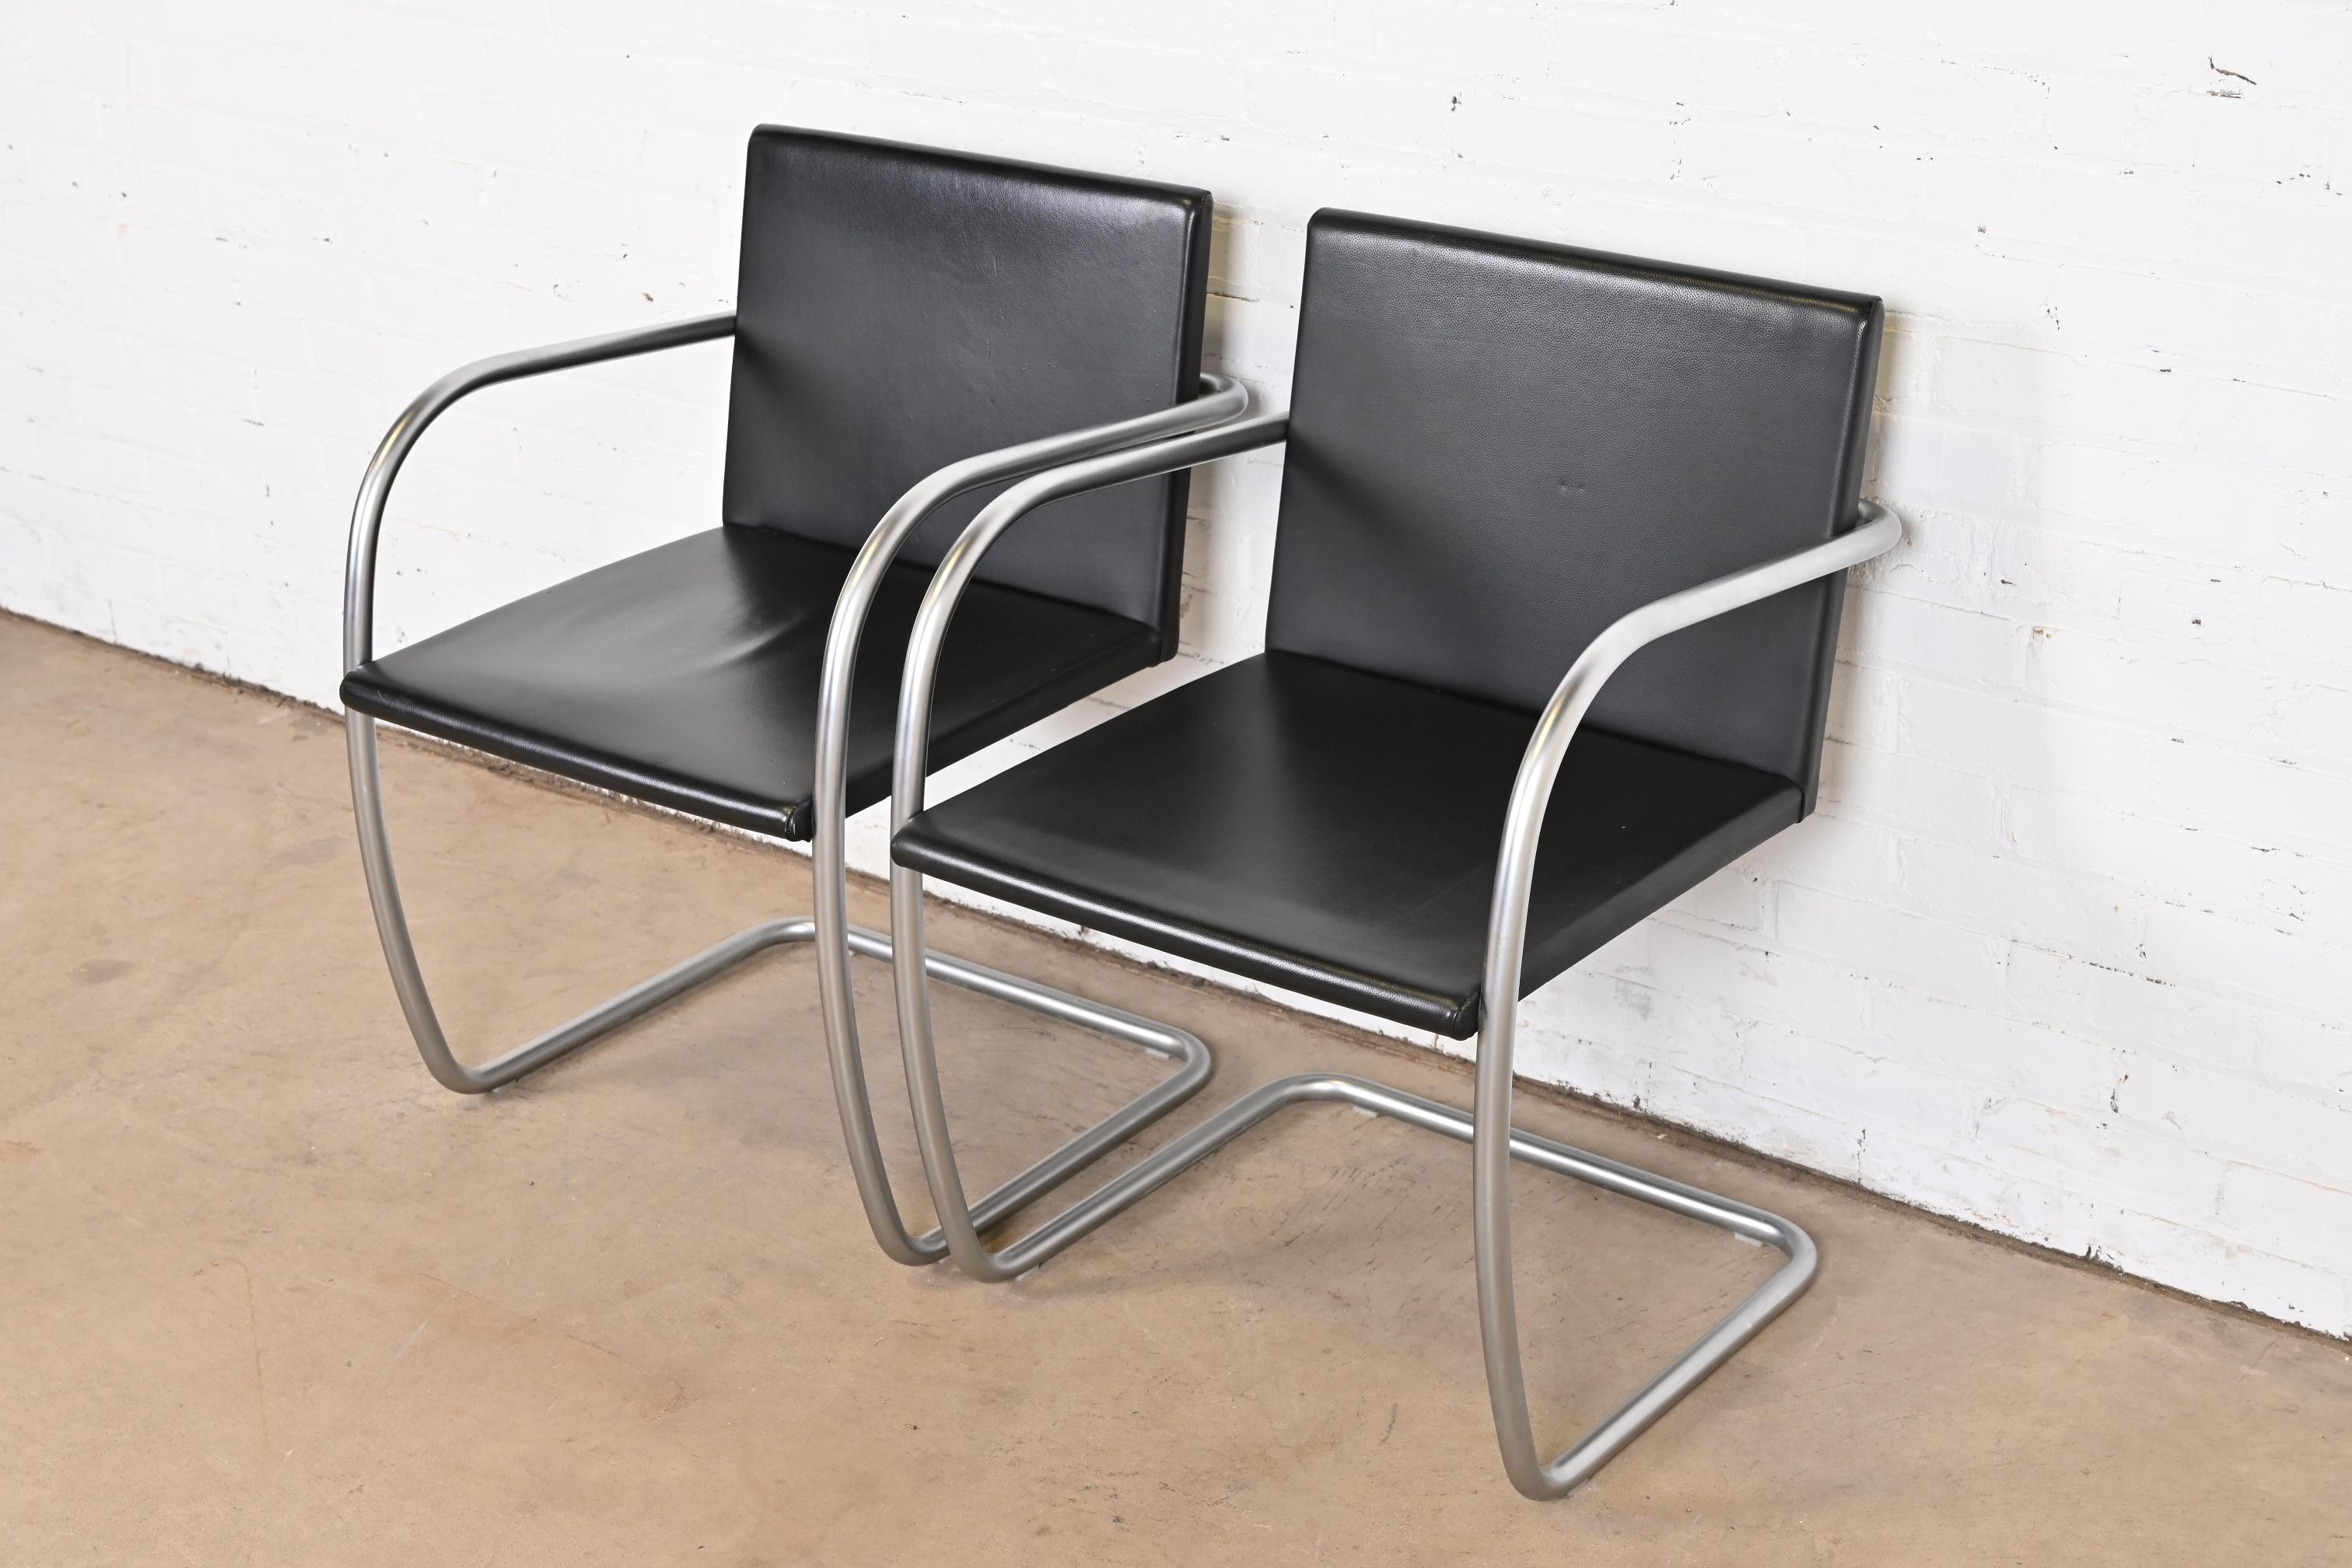 An exceptional pair of Mid-Century Modern Brno tubular club or lounge chairs

Designed by Ludwig Mies van der Rohe in 1930 for the Tugendhat House

Produced by Knoll

USA, Late 20th Century

Cantilevered chrome-plated steel frames, with black